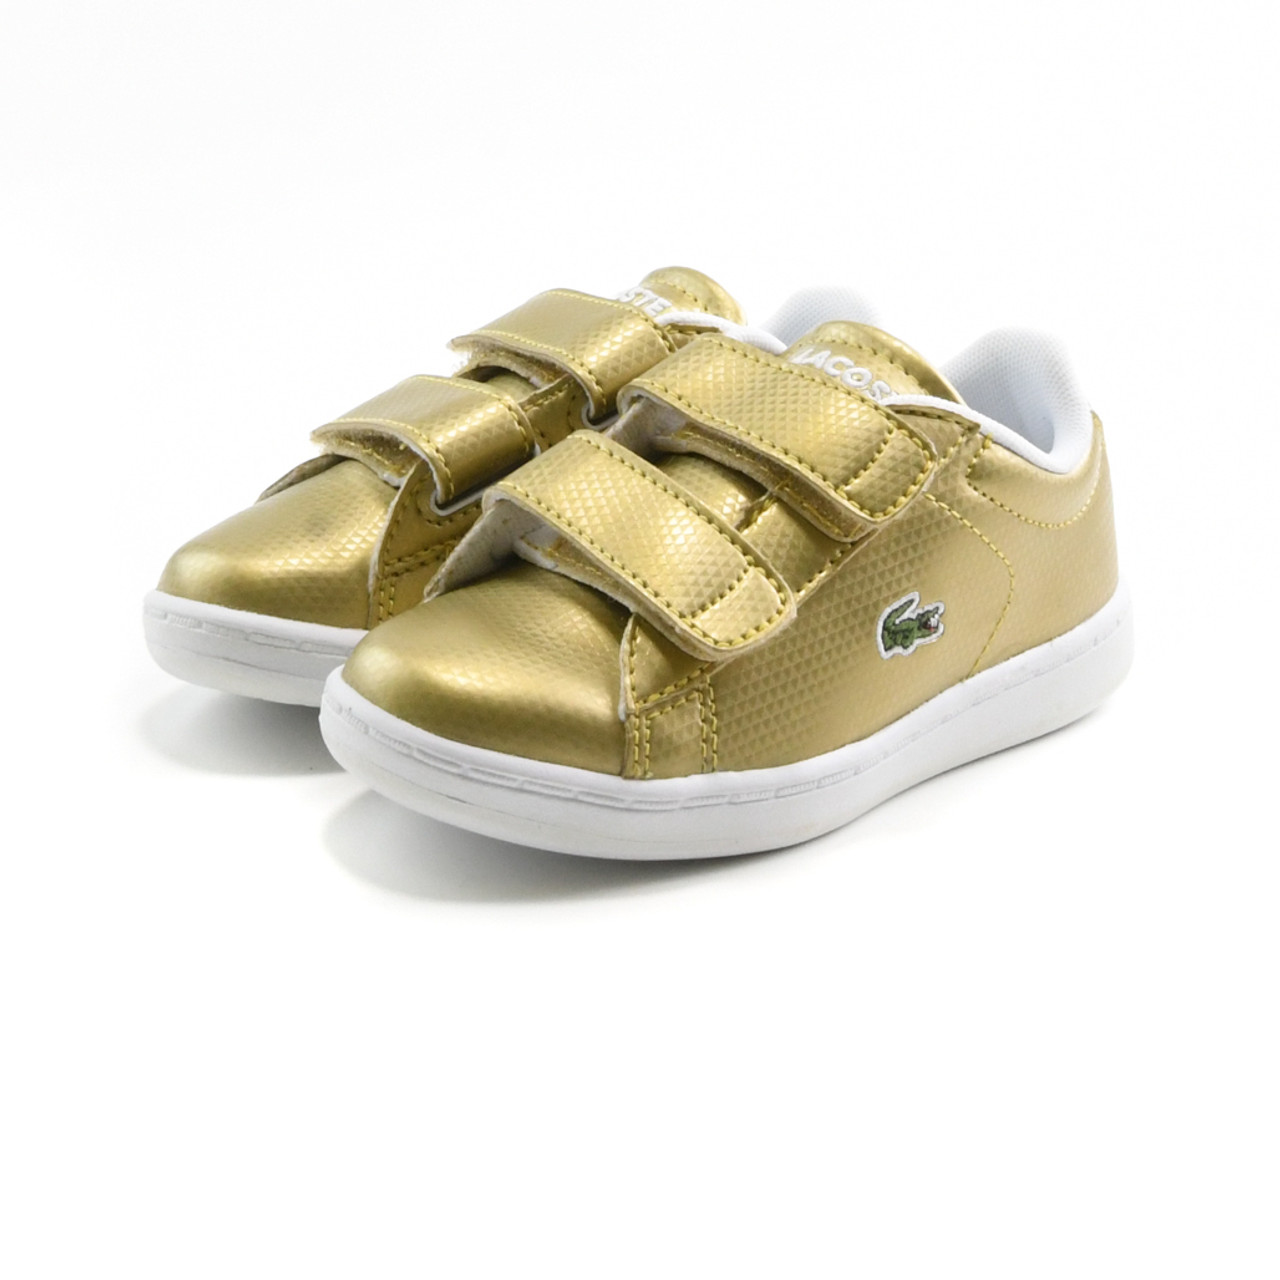 LACOSTE Carnaby Evo "Golden Runner" Gold Shoes Boys and Girls - Baby | Hera +